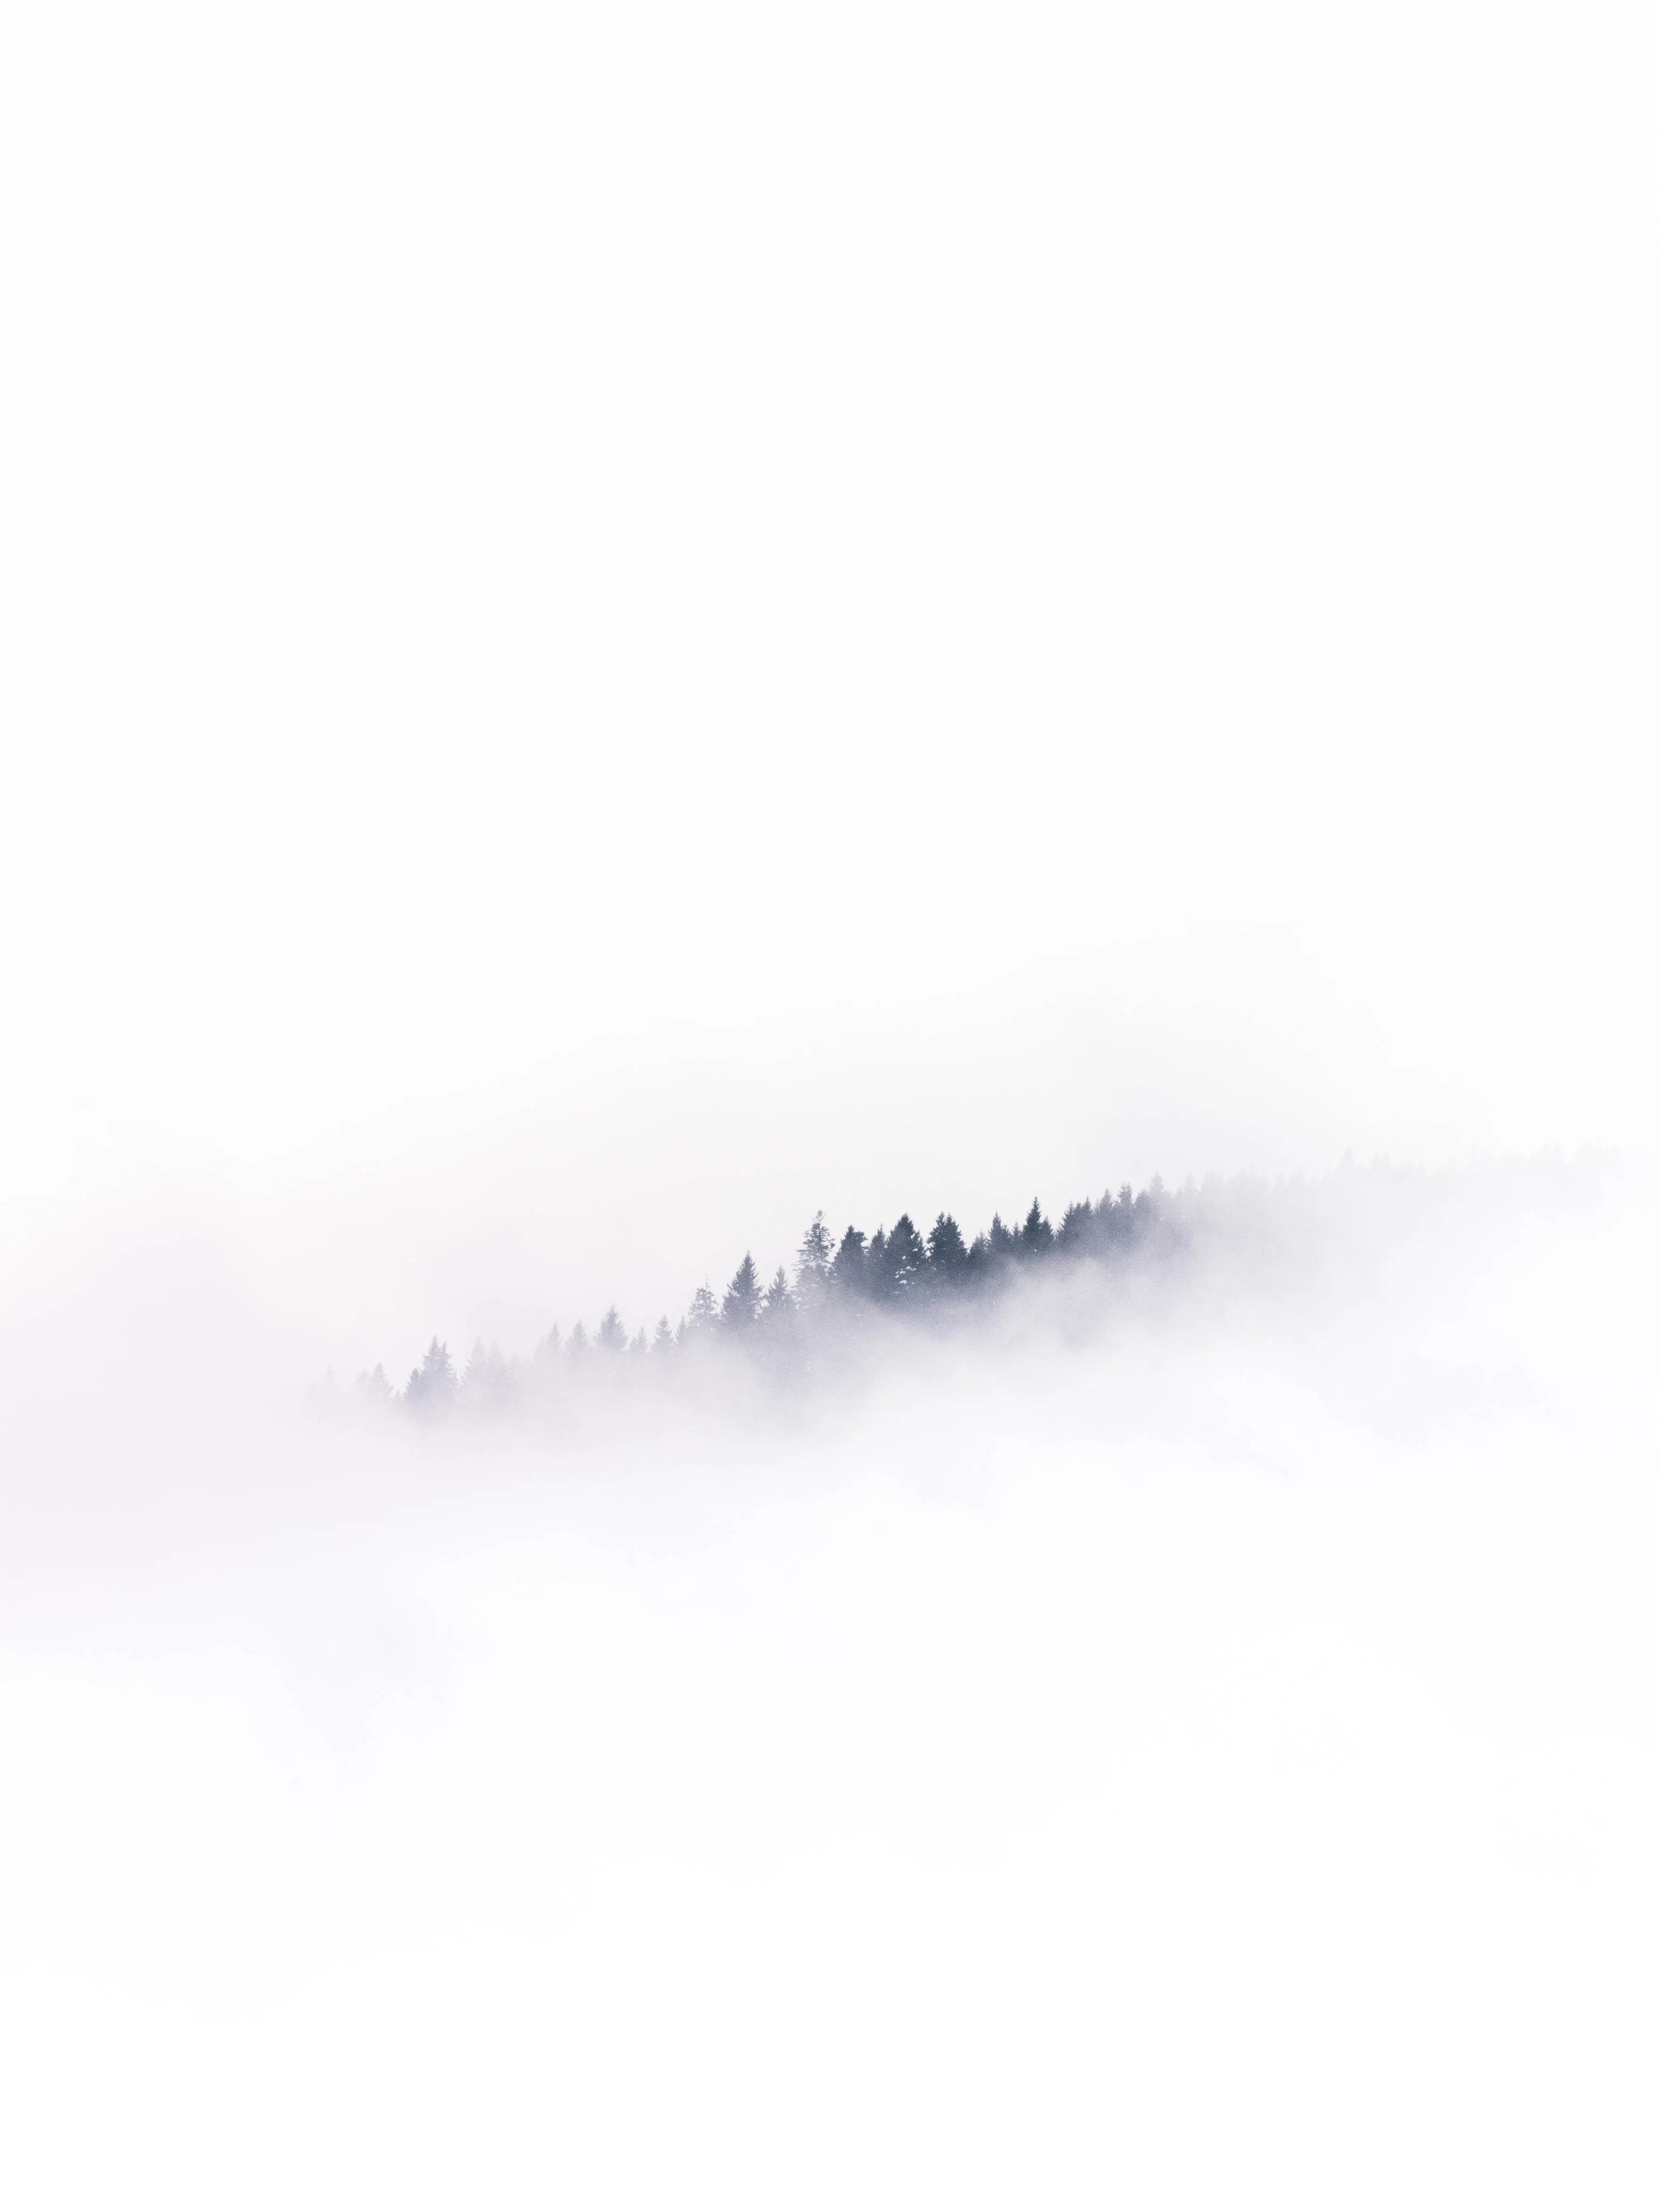 A dense forest shrouded in a thick mist, with tall trees emerging from the fog like ghostly sentinels.